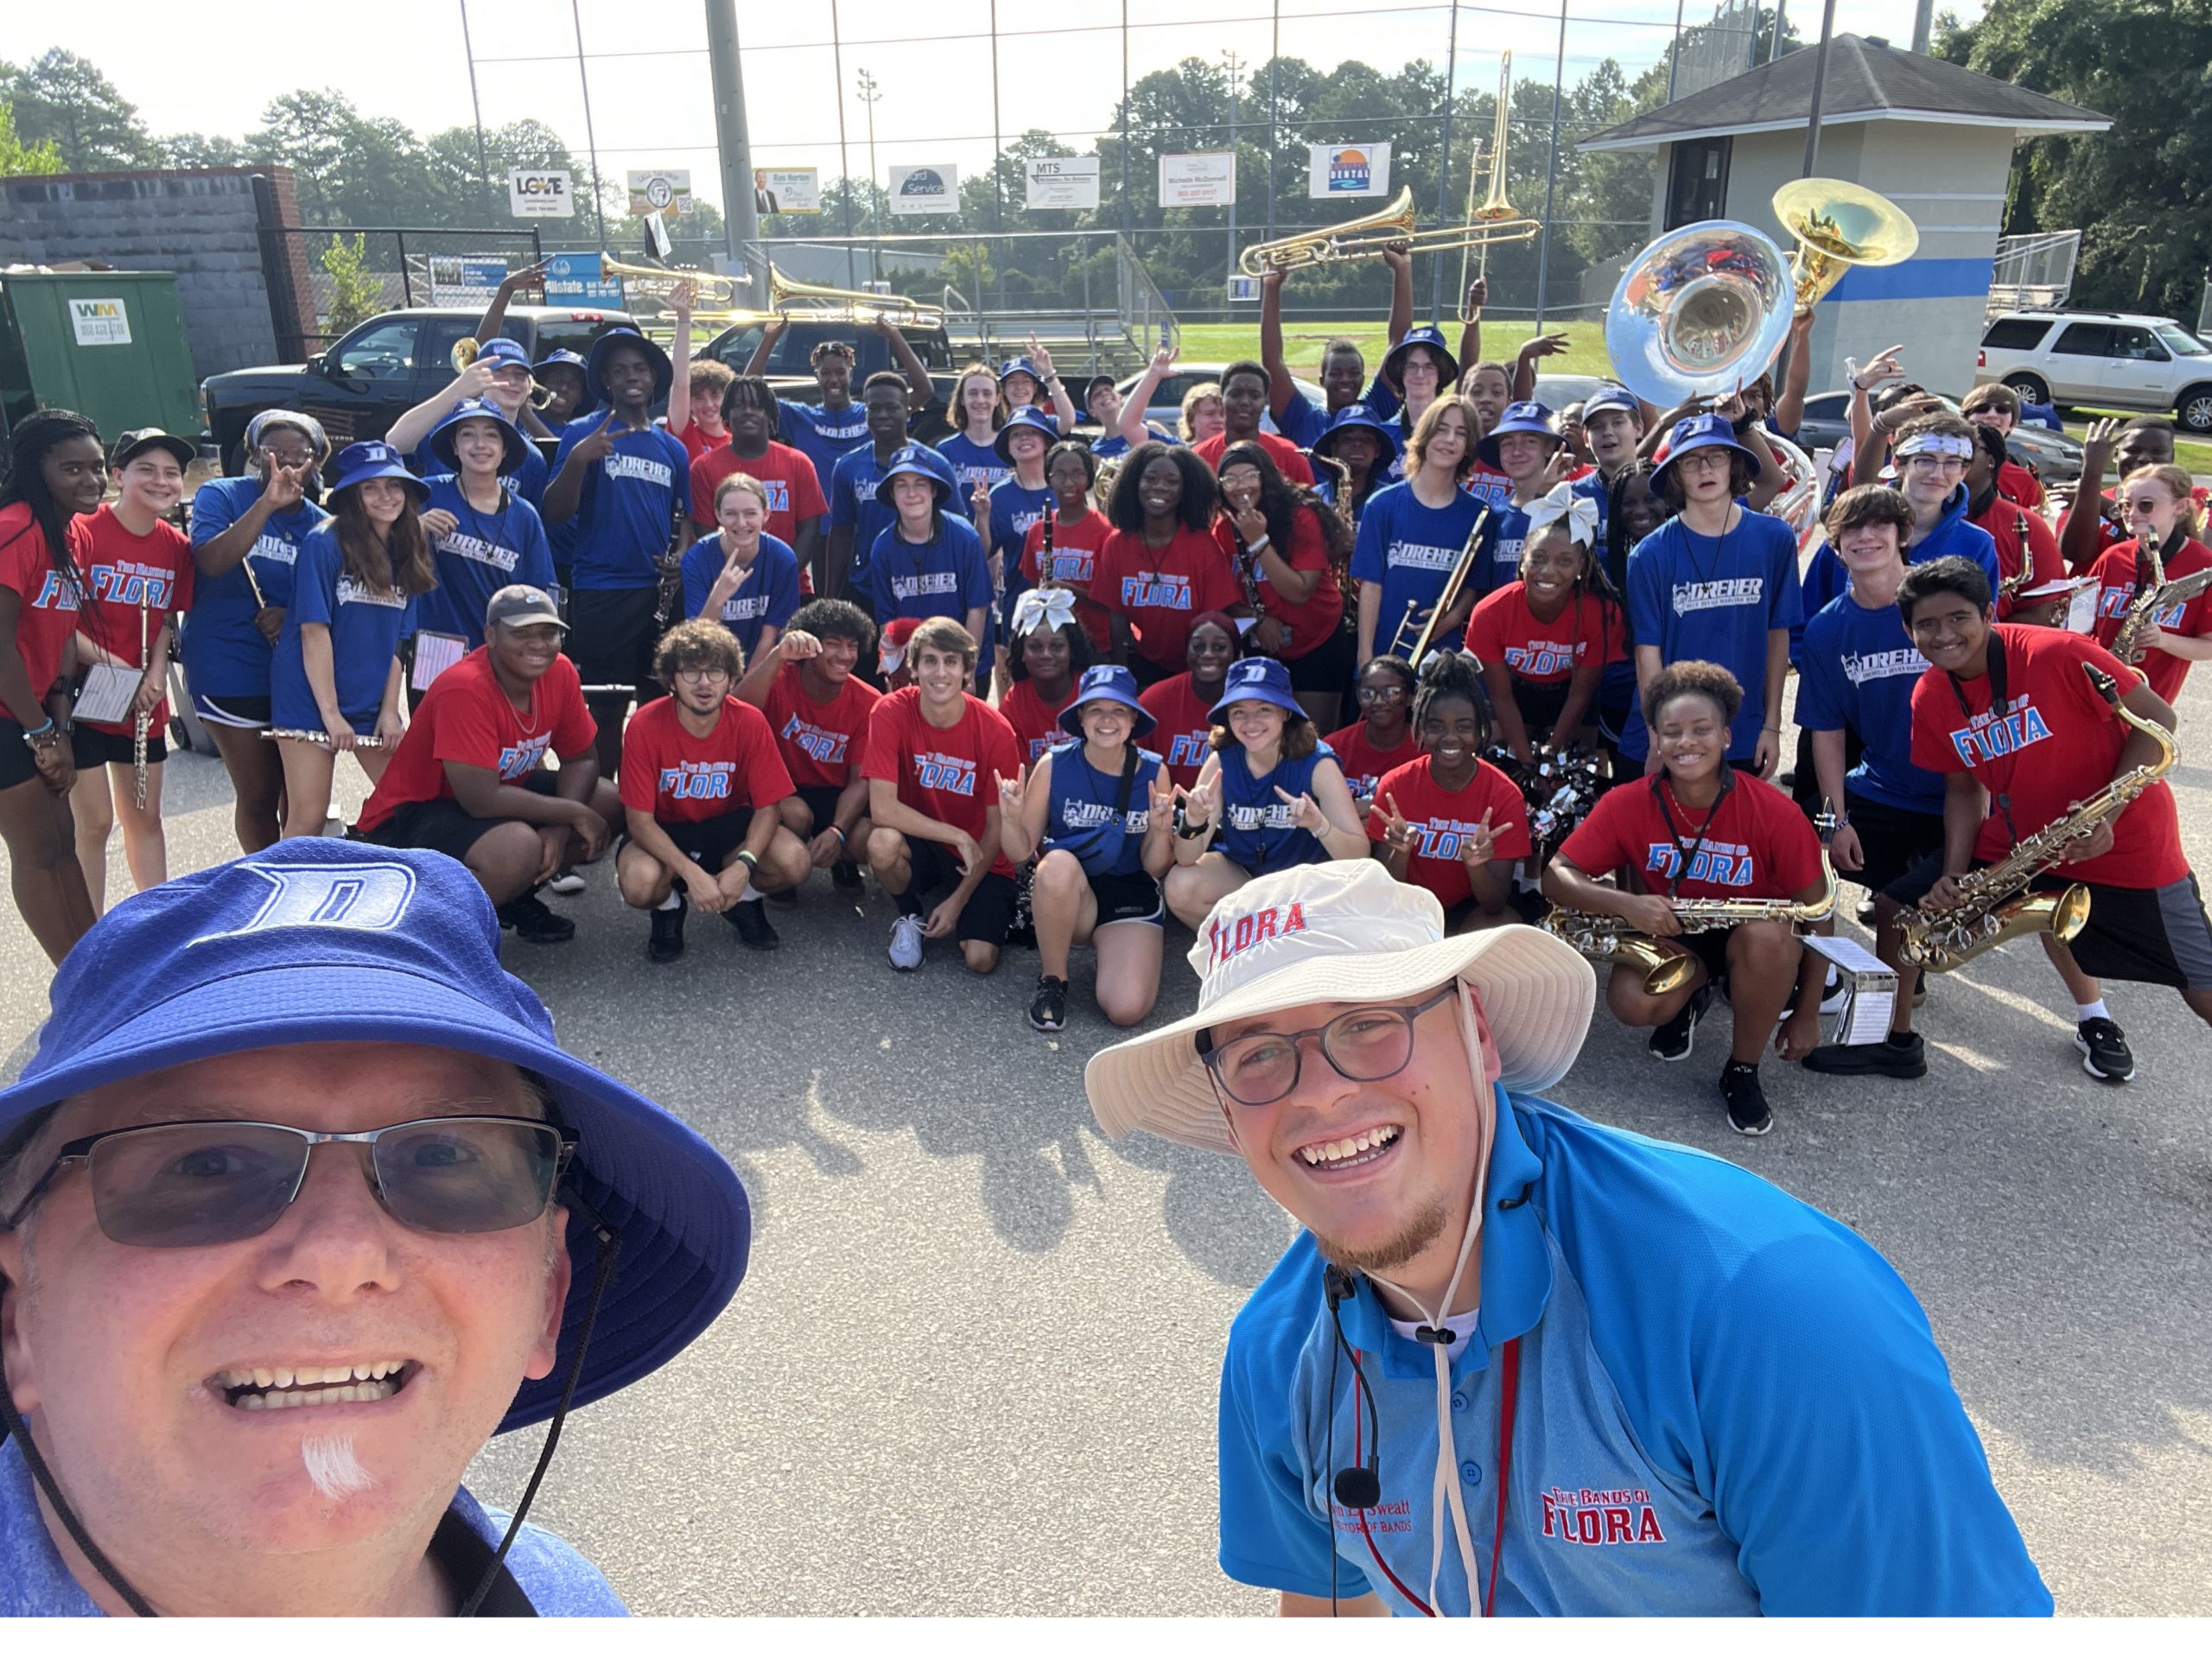 Dr. Chris Lee, Dreher High School band director, and Kevin Sweatt, A.C. Flora band director, combined members of the Dreher and A.C. Flora marching bands for a fun half-time performance during their rivalry football game on Aug. 27. Photography courtesy of AC Flora Band Boosters